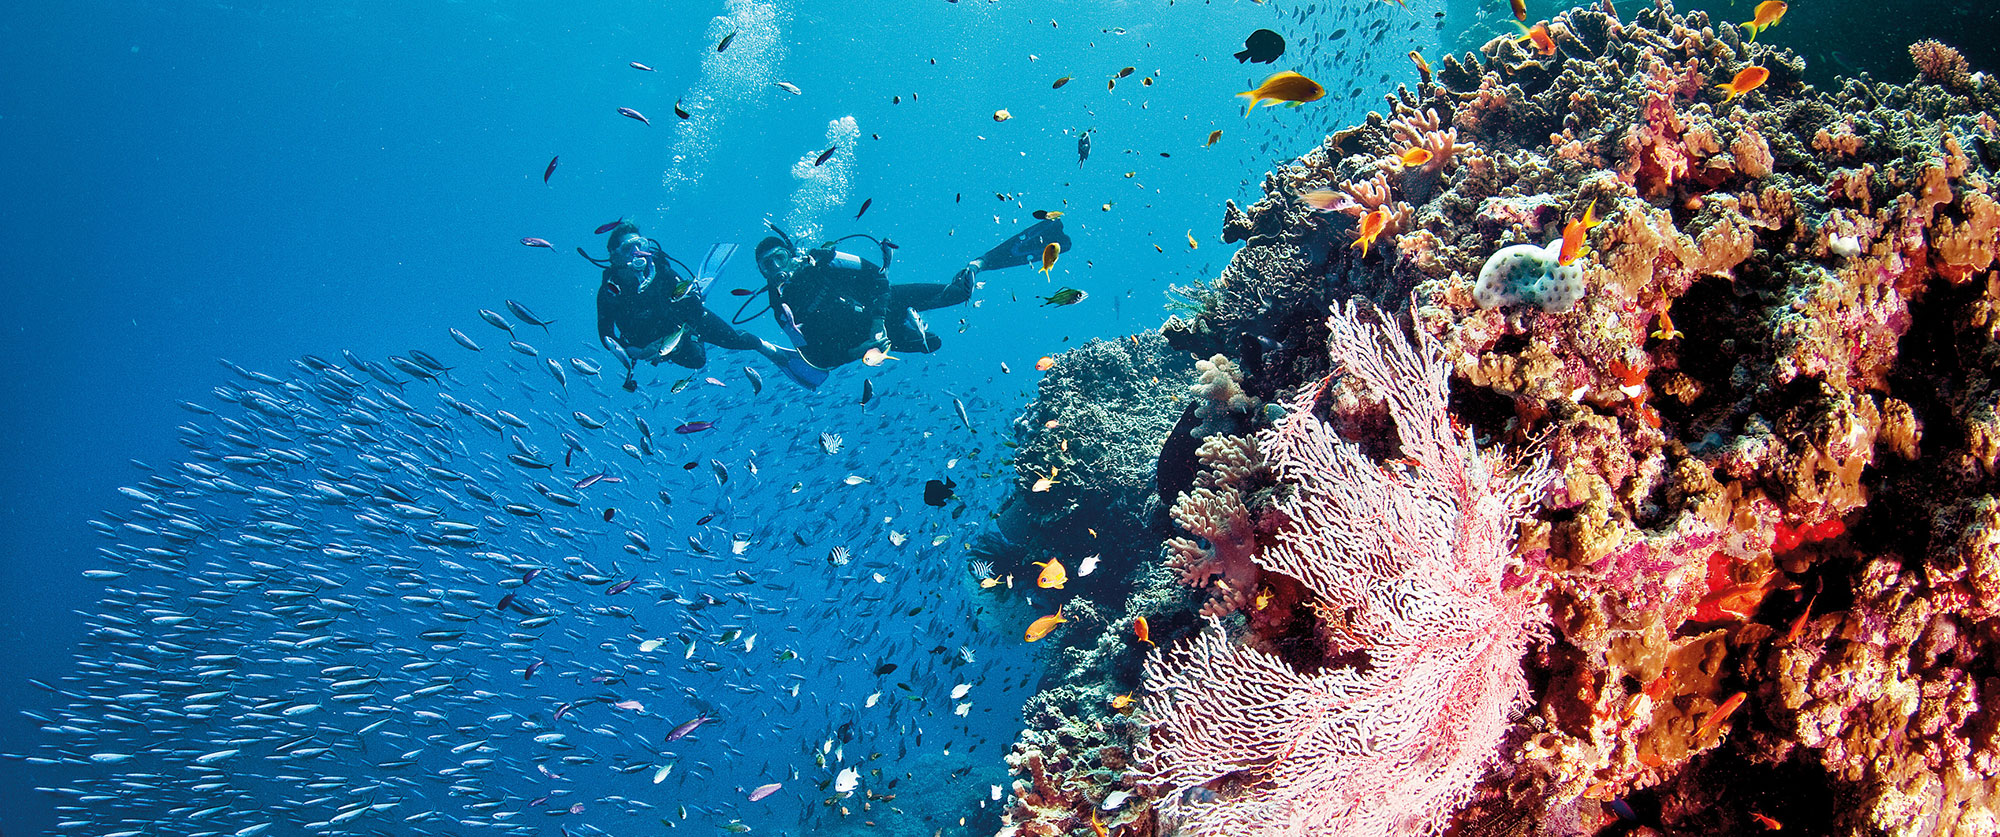 Australia Honeymoon - Snorkel and dive in the Great Barrier Reef, a scuba diver's paradise